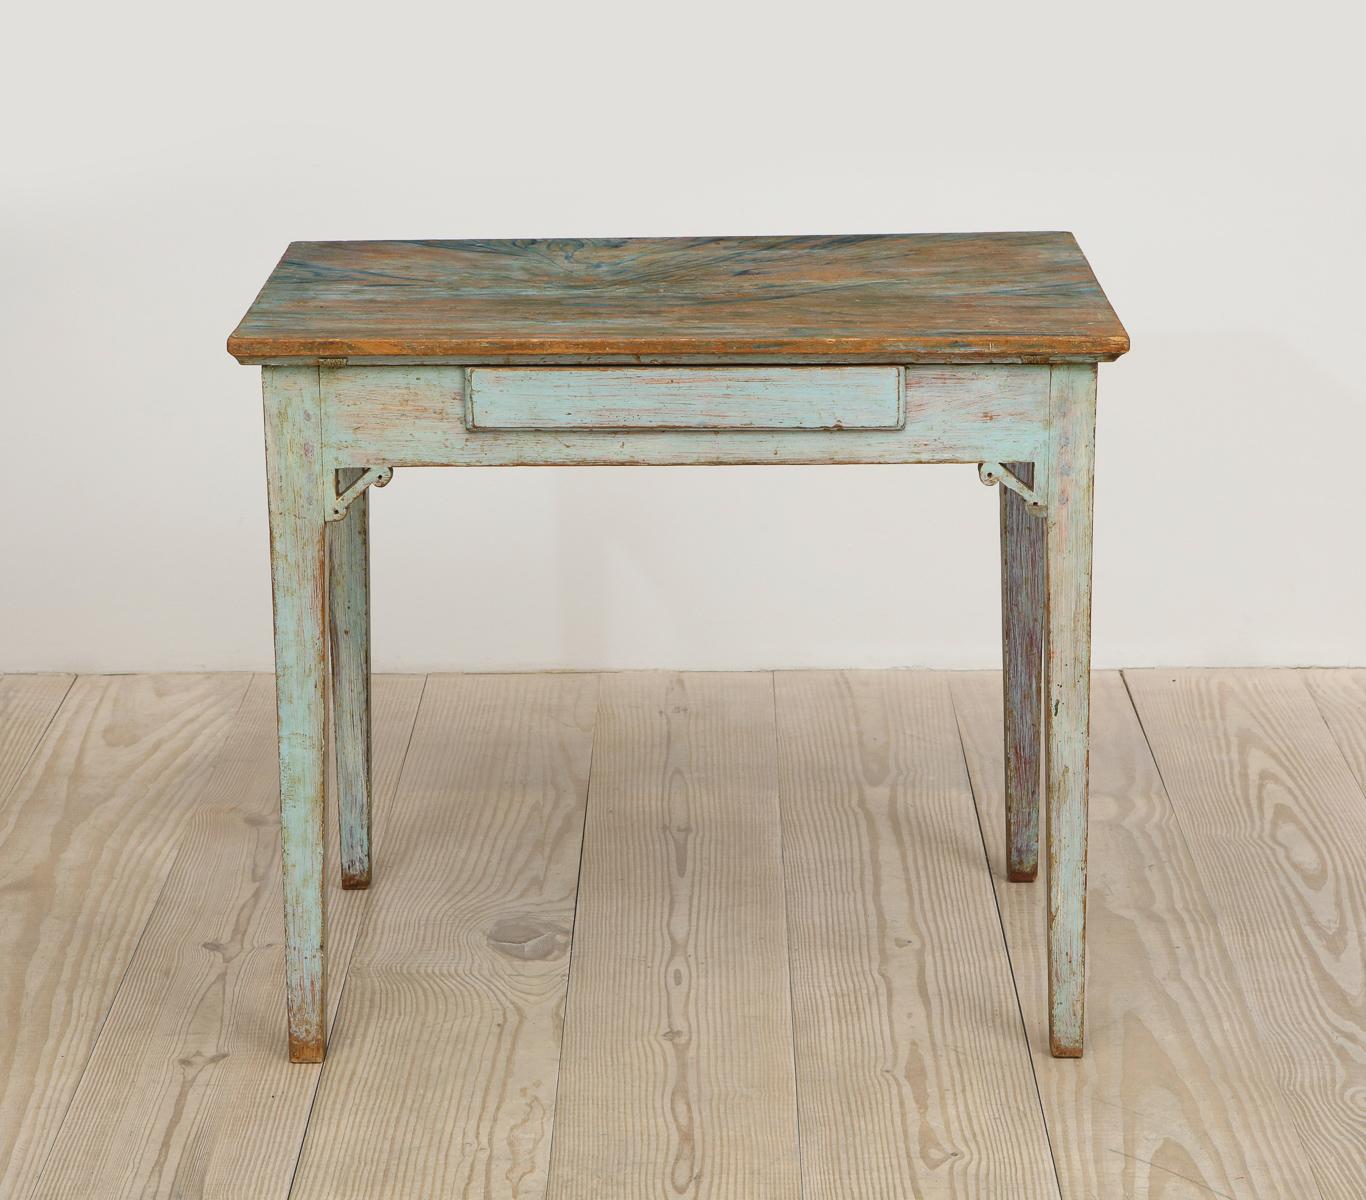 Swedish, Gustavian, 18th century table with a center drawer, circa 1790, origin Sweden

Table with beautiful, original paint and faux marble top. A wonderful desk / writing or side table.